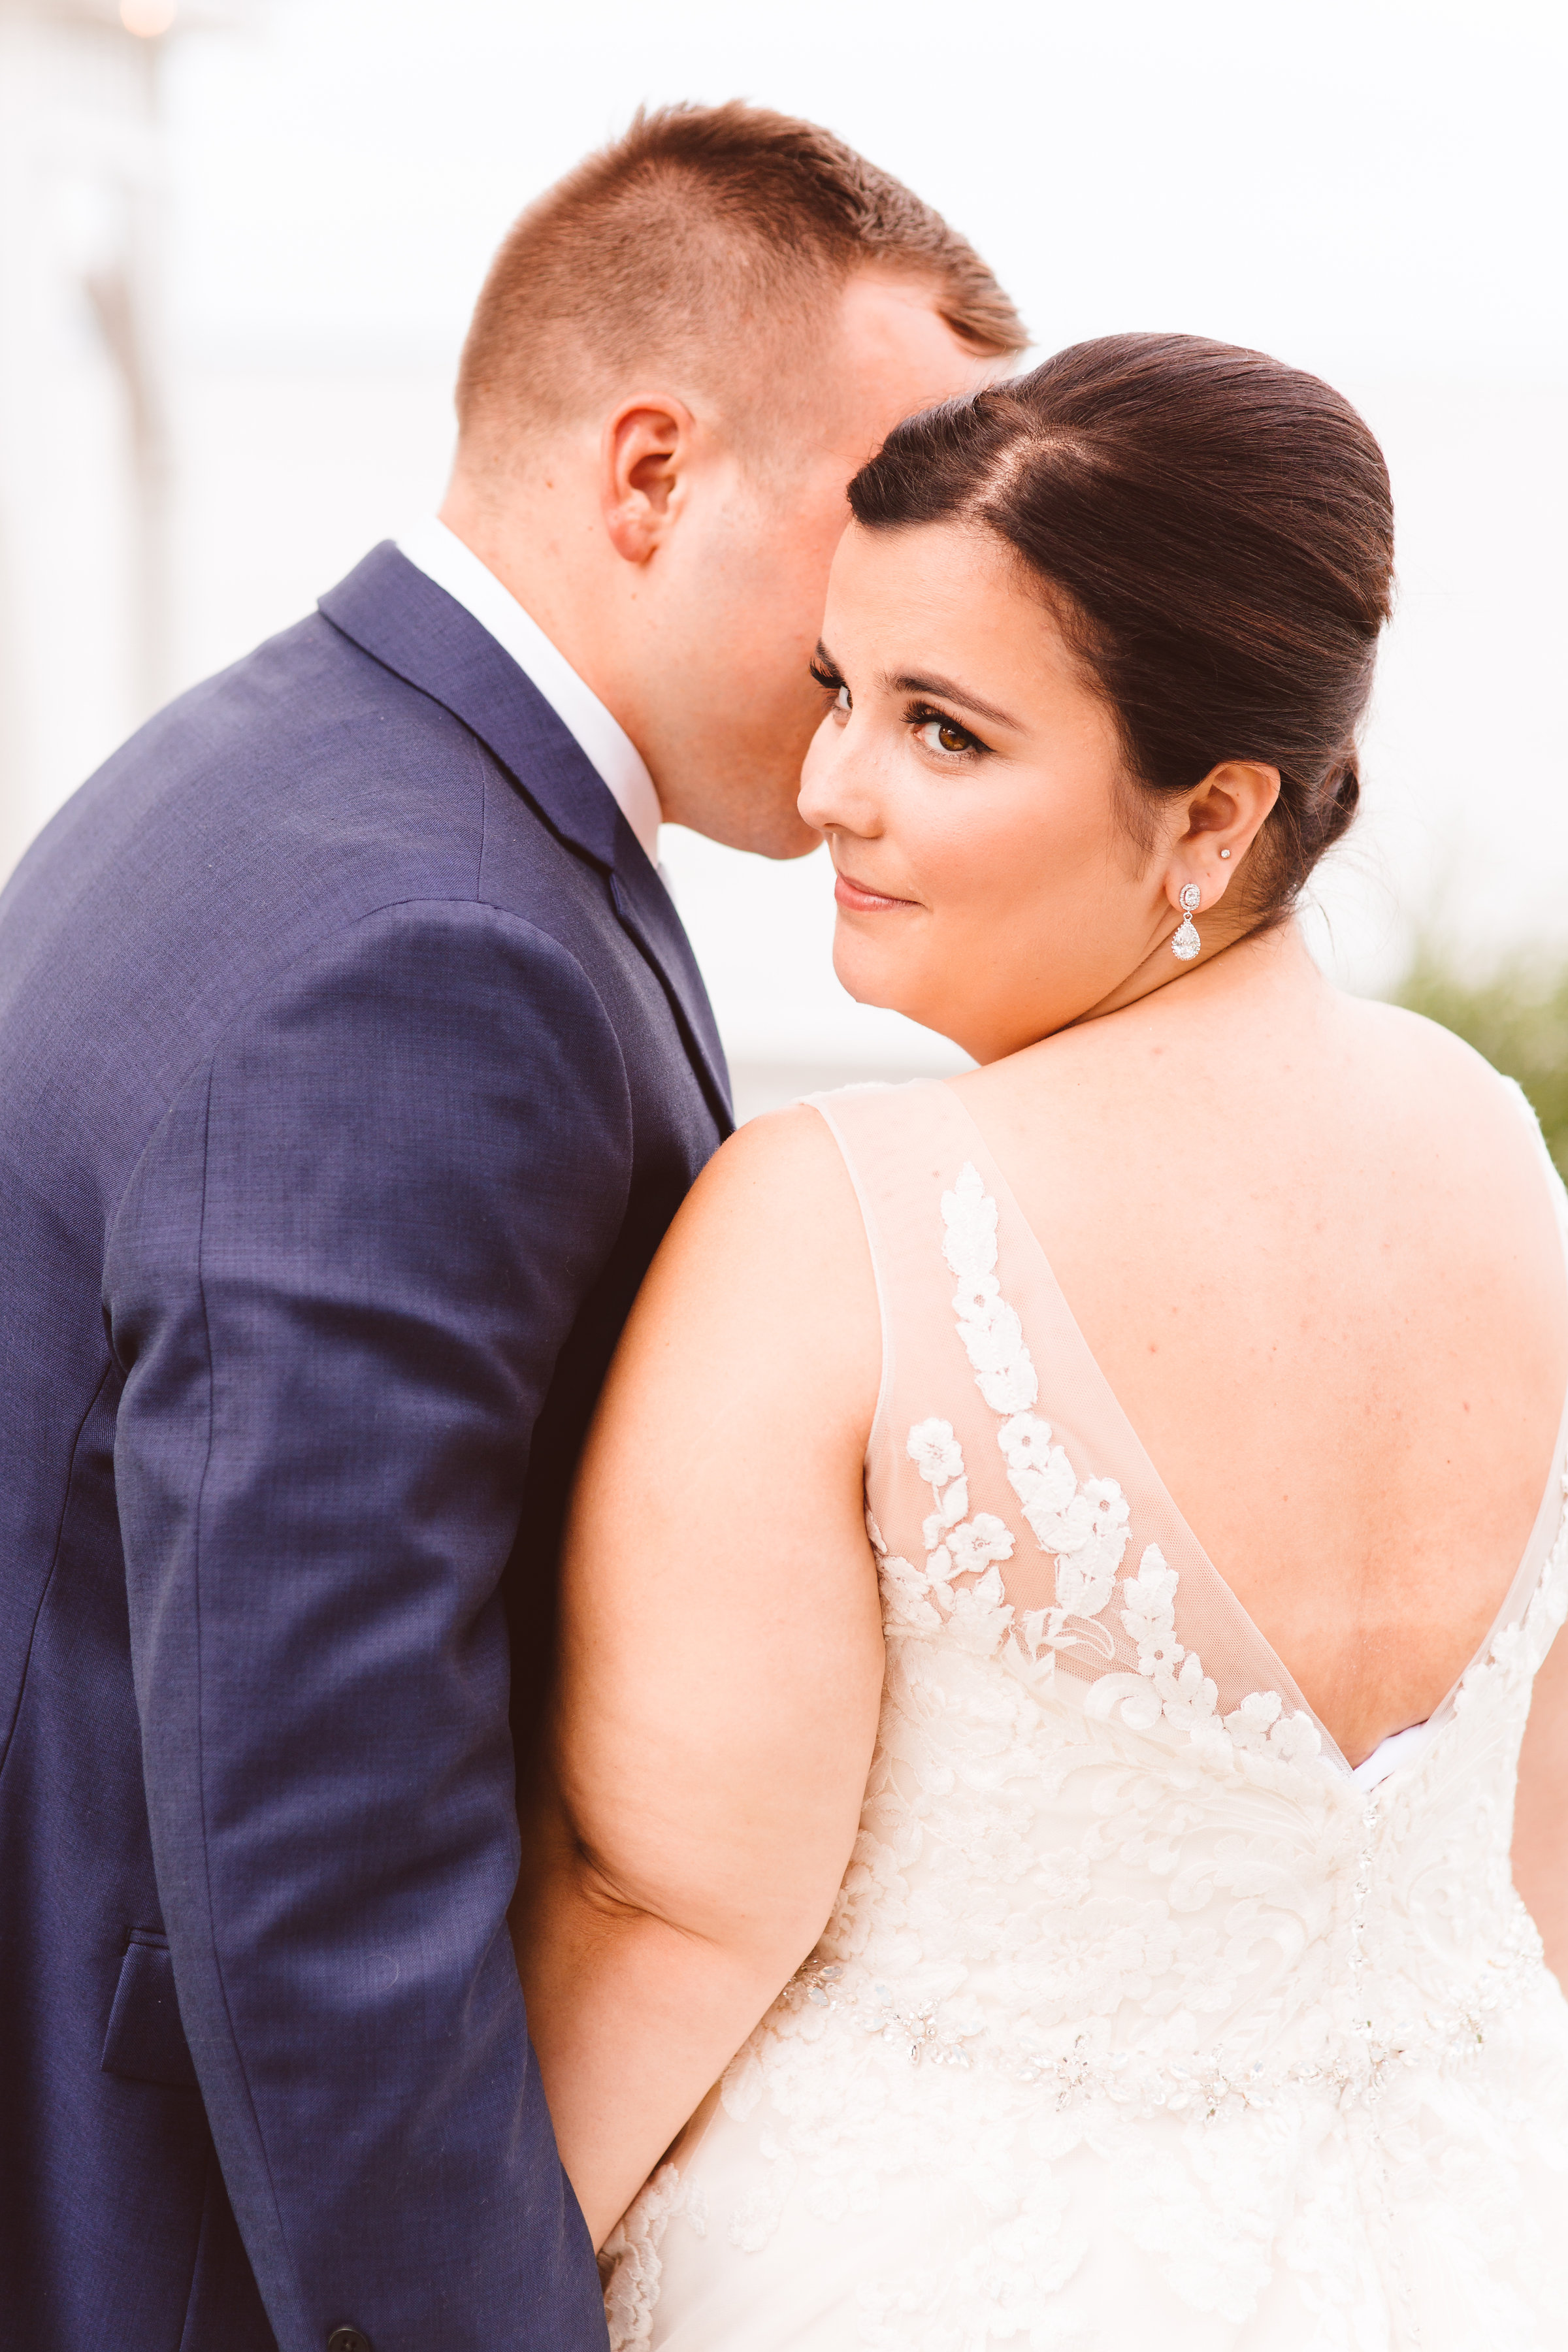 Romantic Eastern shore Maryland bayside wedding Custom and couture bridal jewelry Brooke Michelle Photography Celebrations by the Bay J'Adorn Designs Emerald cut engagement diamond ring Vintage halo wedding ring Bridal fashion Bridal couture Lace wedding gown Teardrop handcrafted bridal earrings